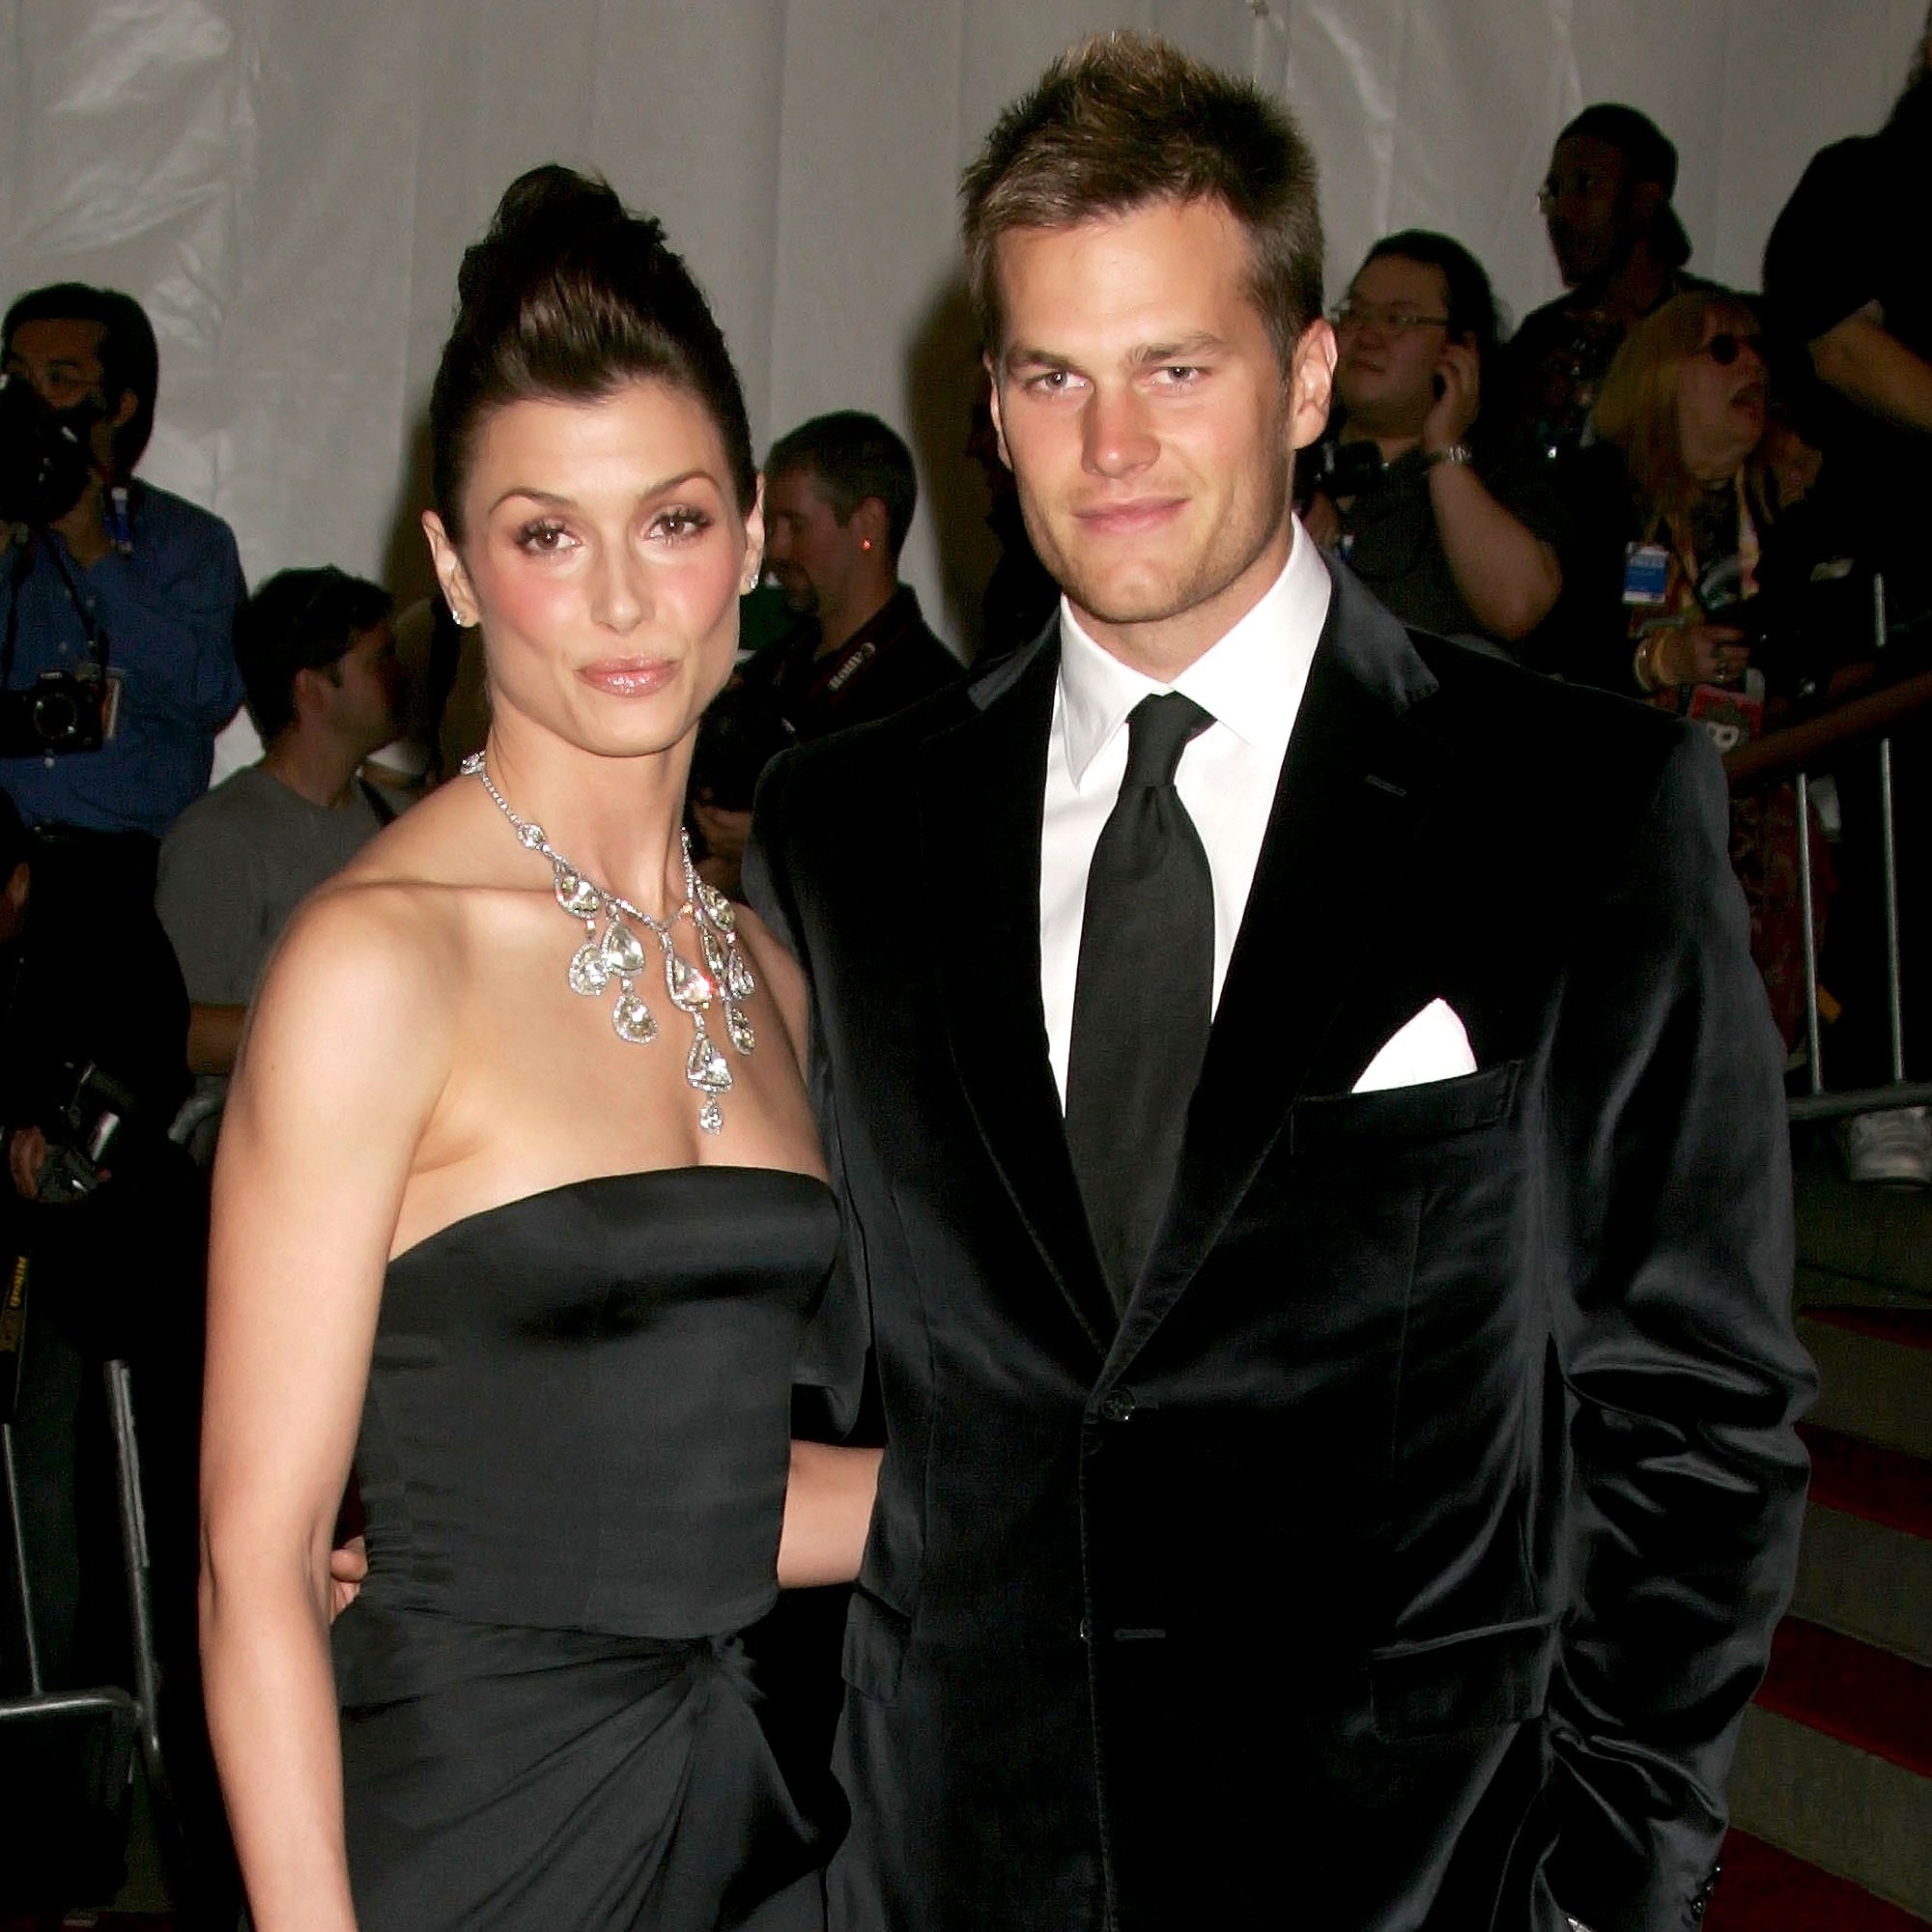 Bridget Moynahans Quotes About Her Relationship With Ex Tom Brady Us Weekly 3509